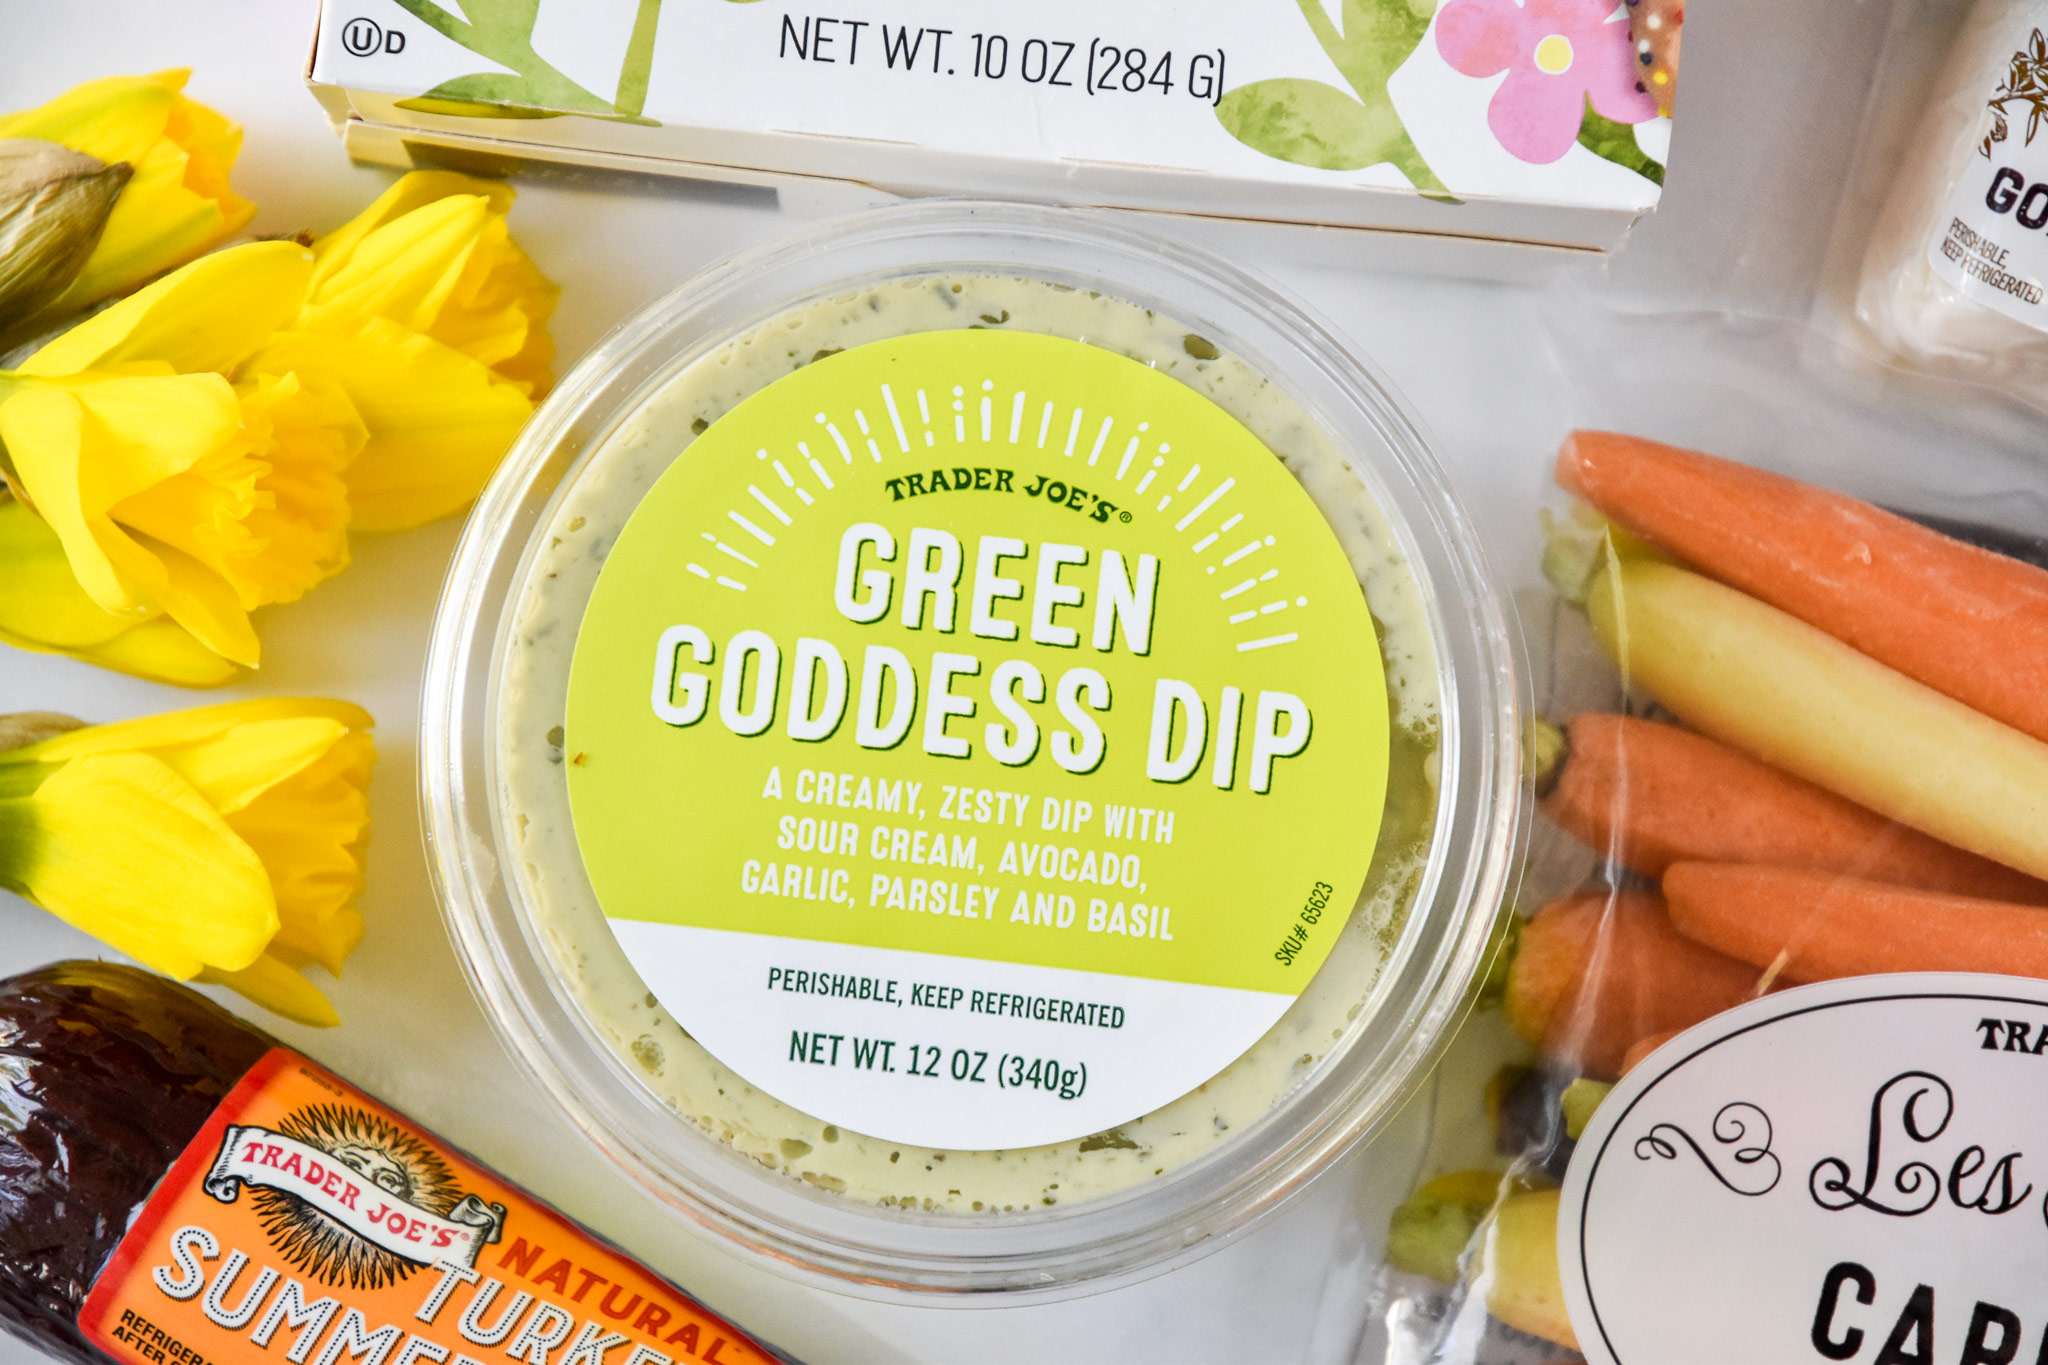 green goddess dip in the original container from trader joes.